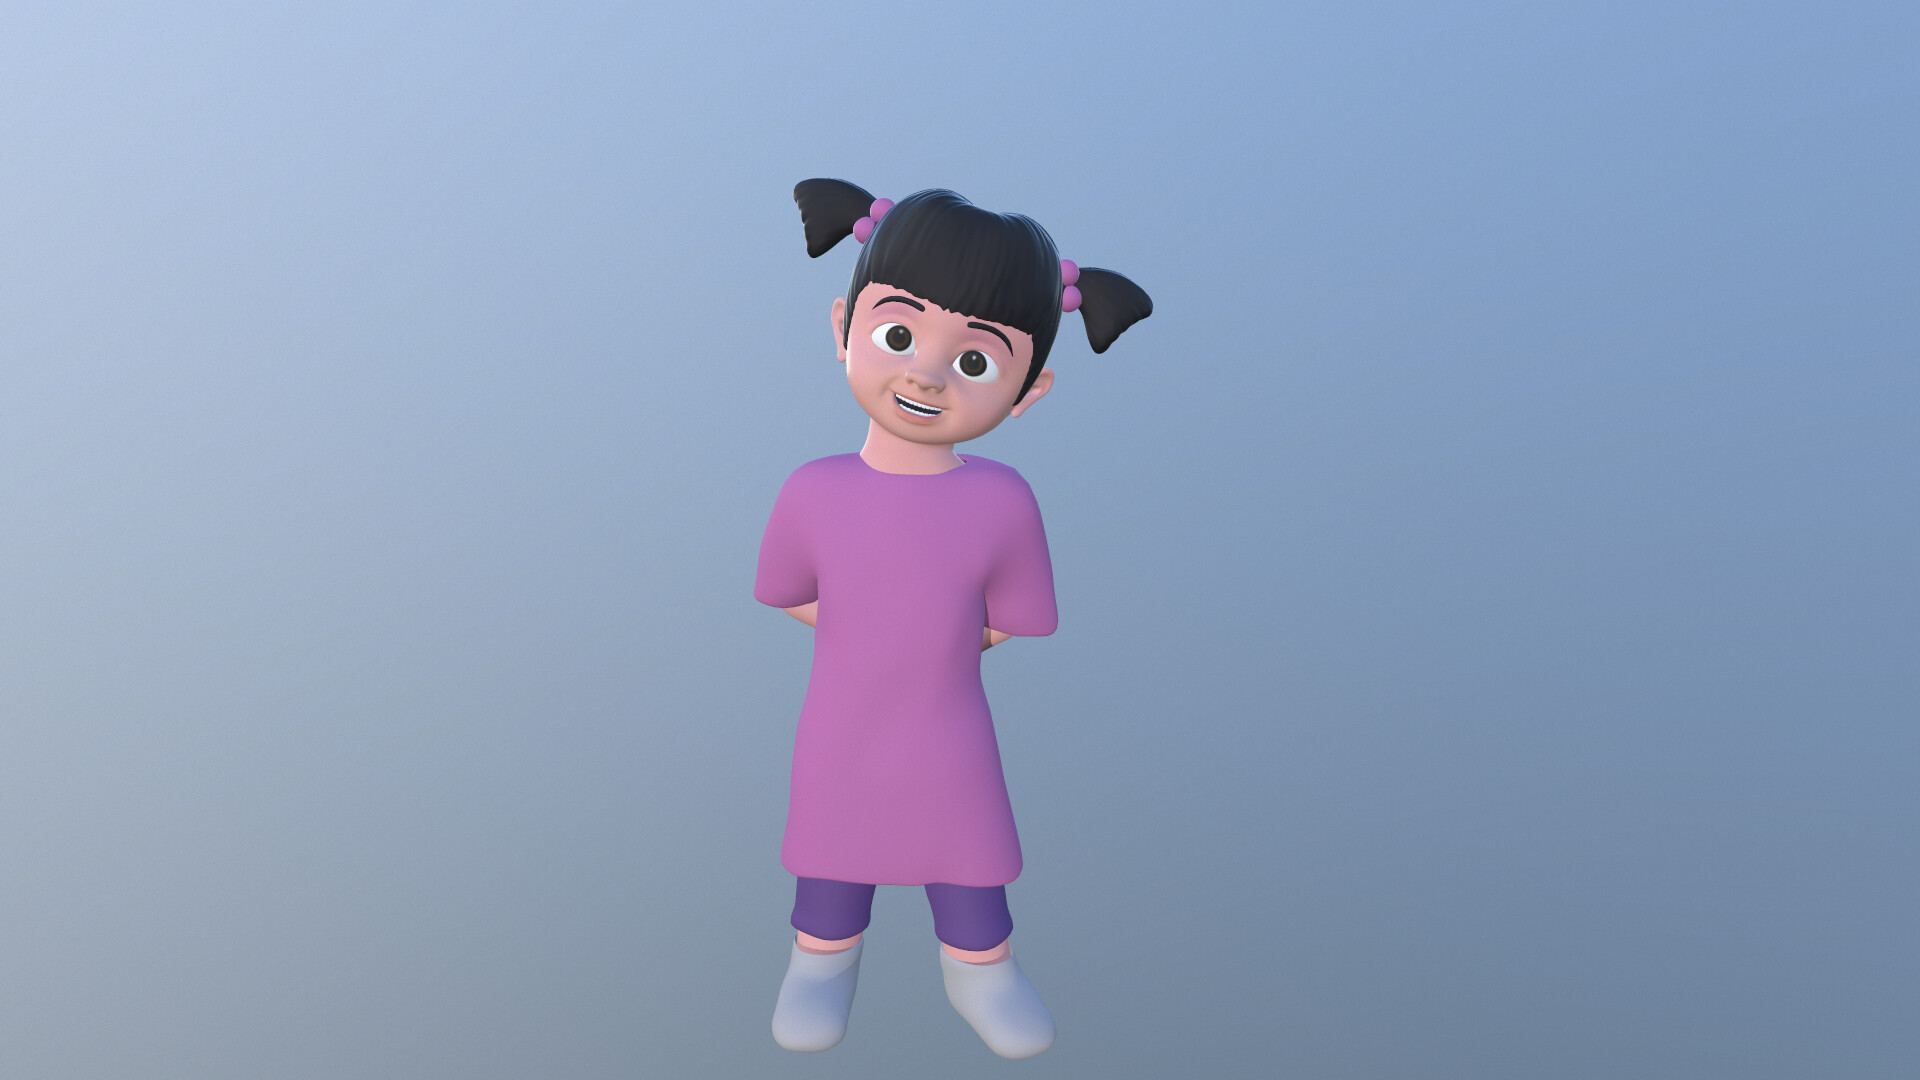 ArtStation - Boo Character from Monster Inc. animation